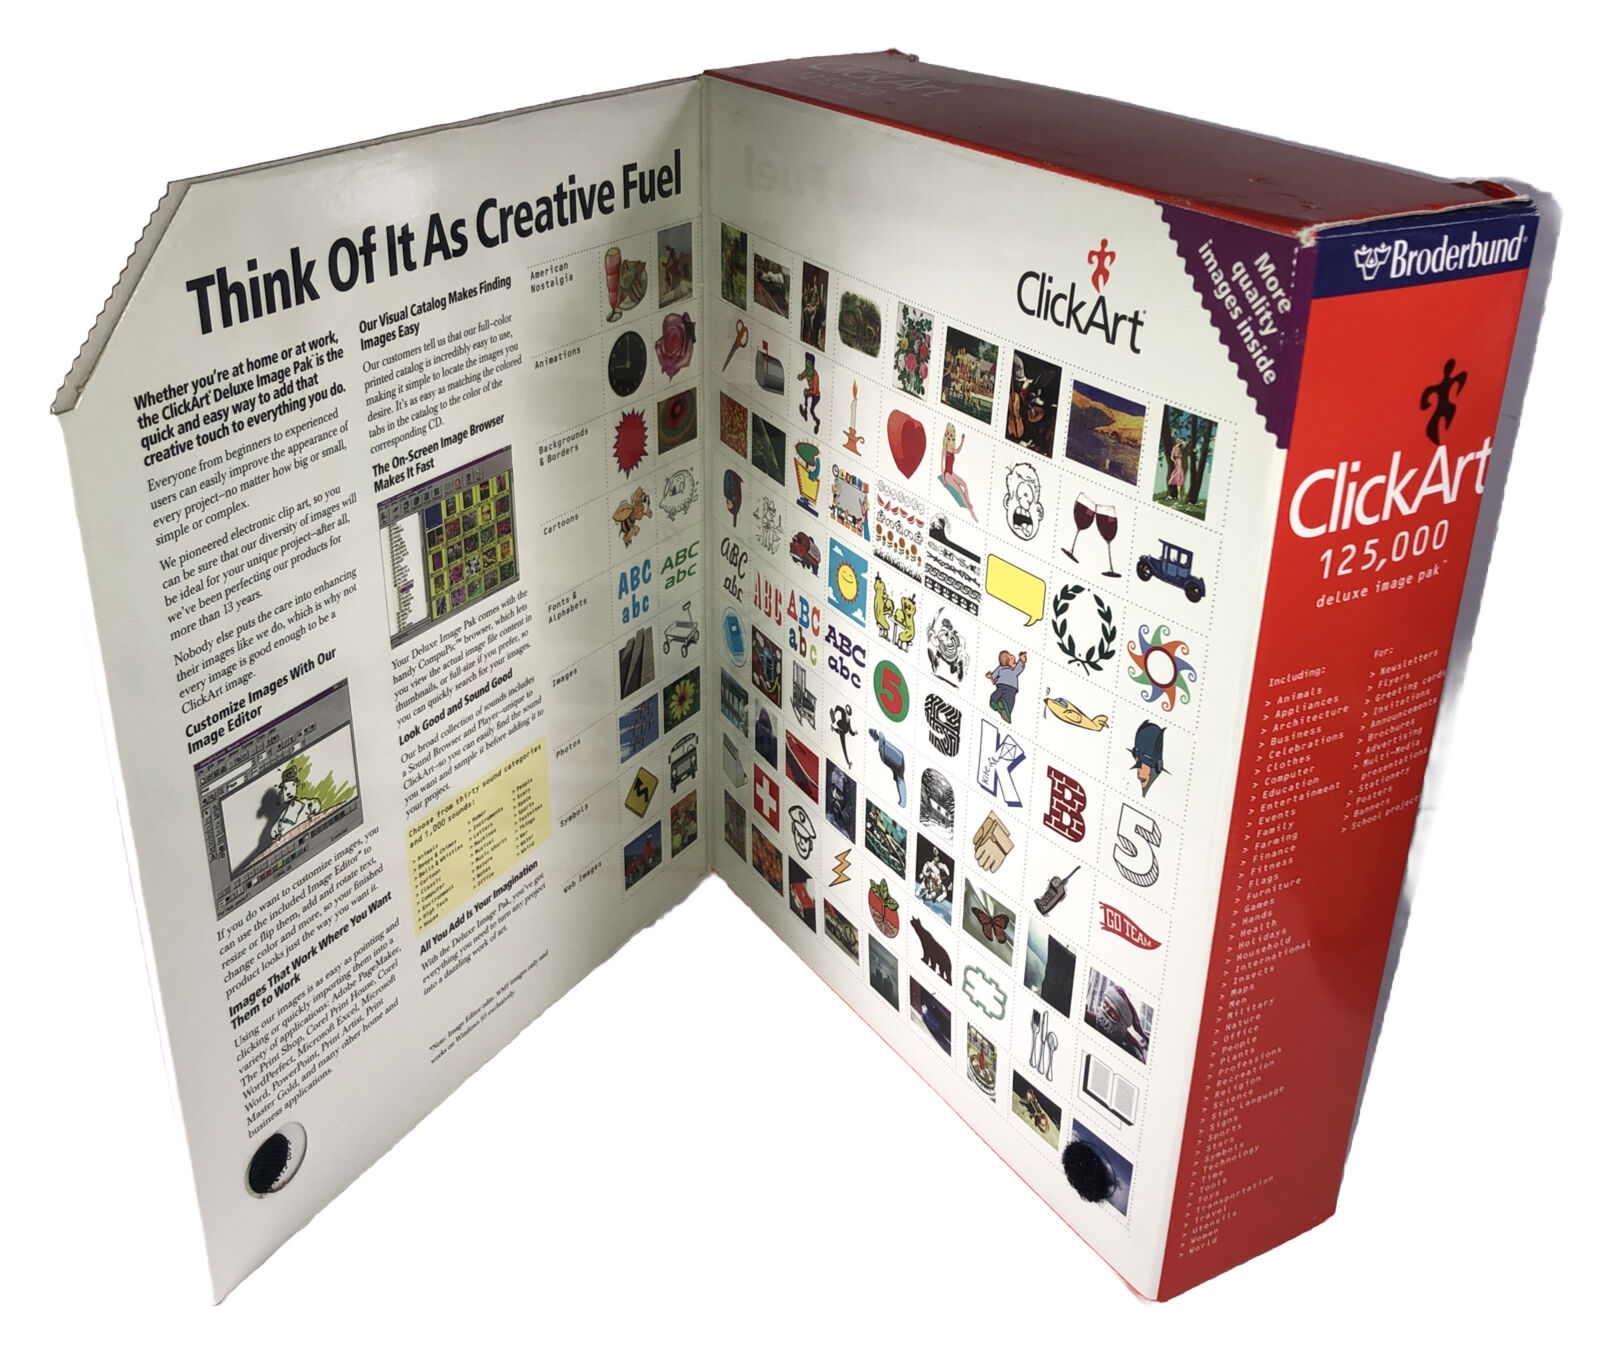 Click Art 125,000 Print Shop Deluxe Images Pak, 2 Users Catalog Guides ,&9 CD’s